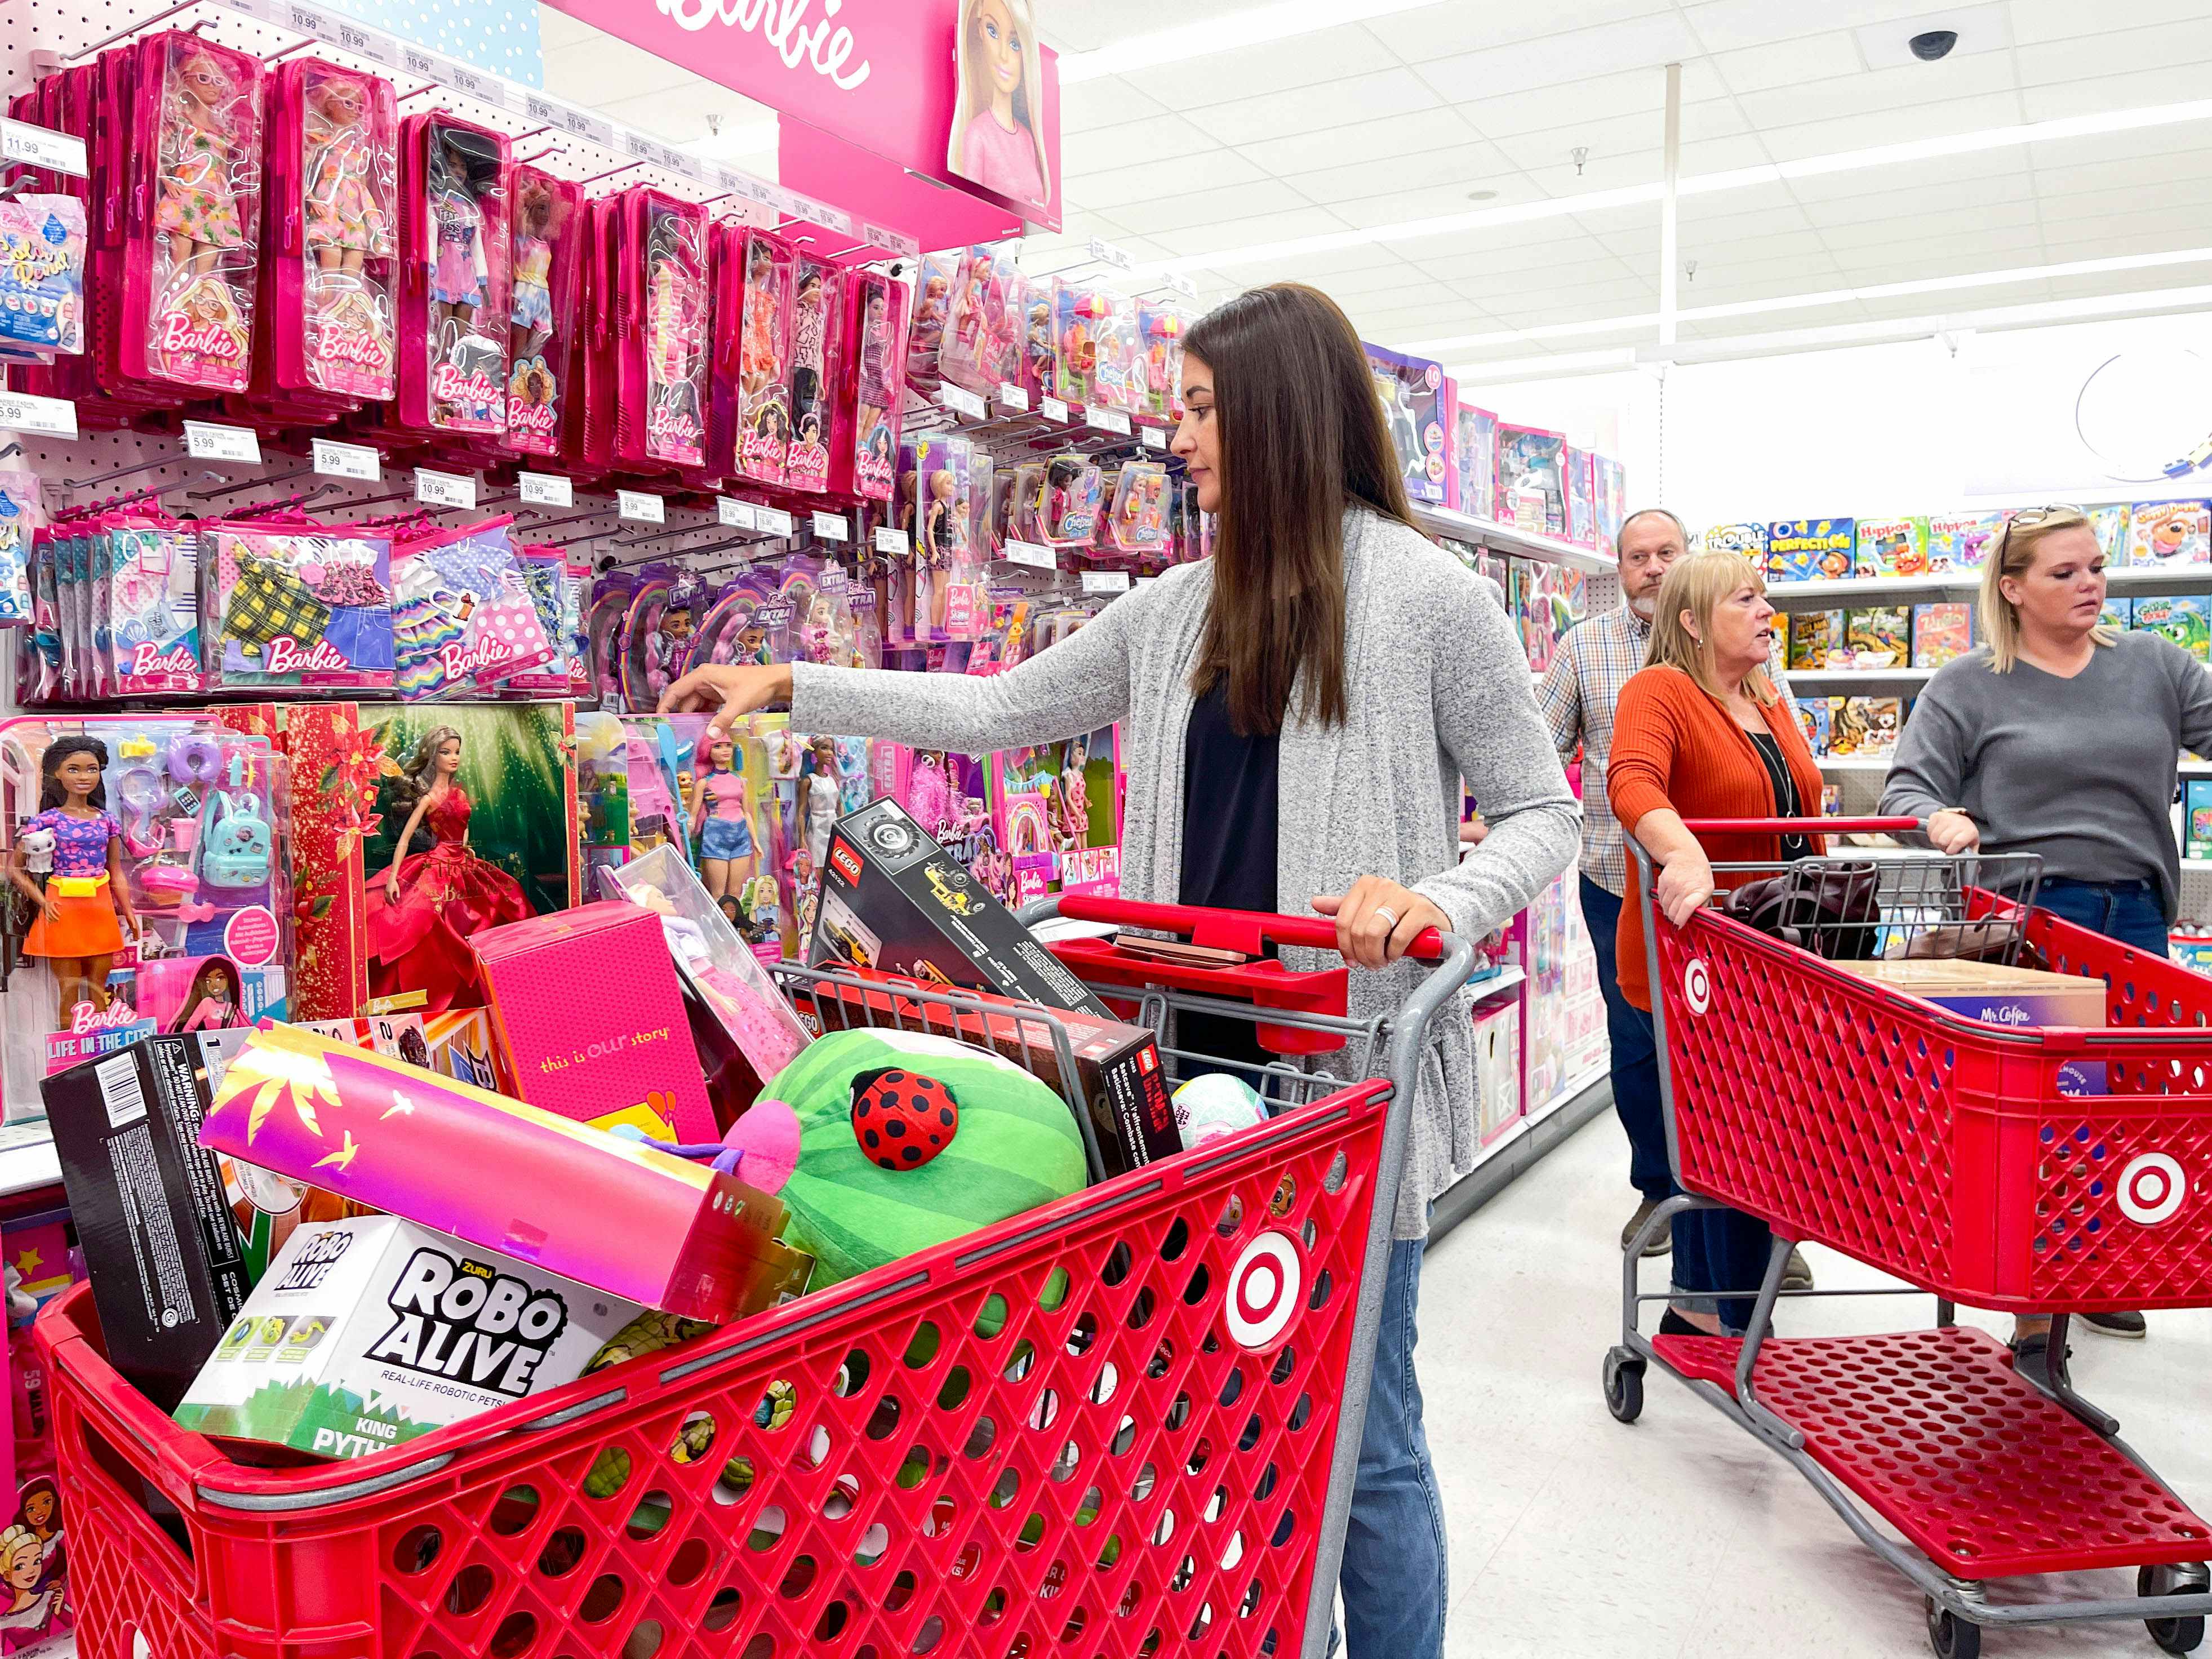 A person pushing a Target cart in the store during Black Friday.